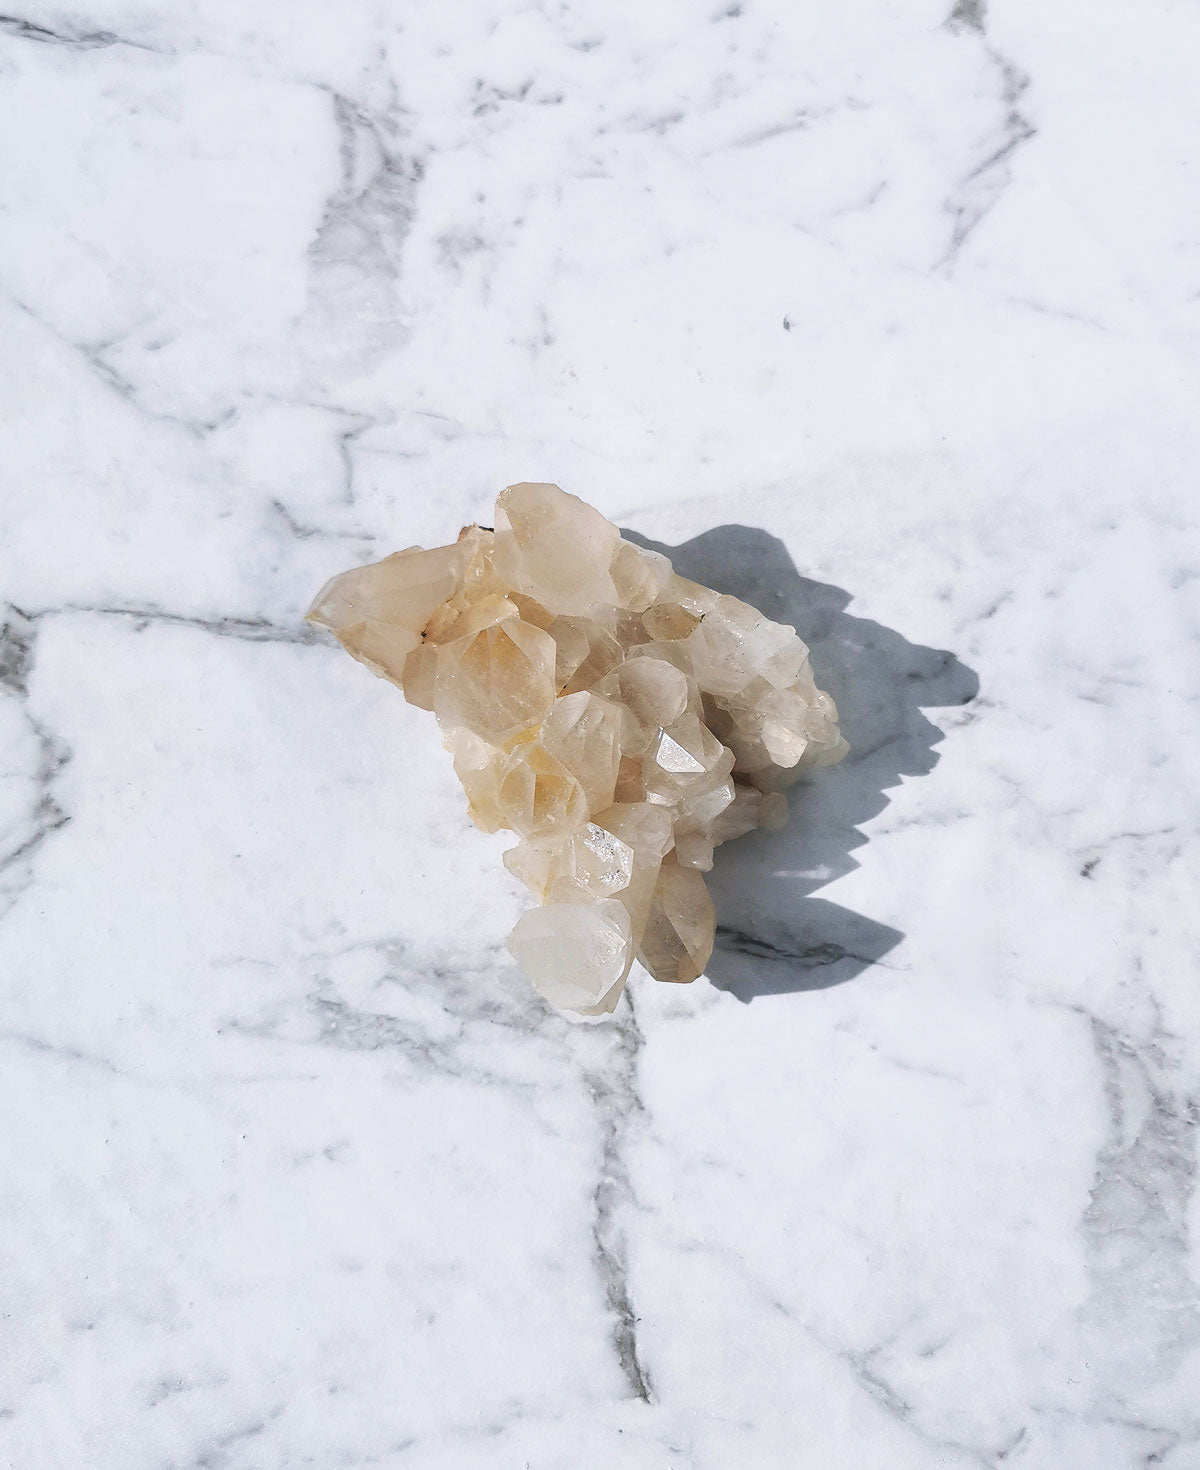 Himalayan Quartz - Cluster (this one)